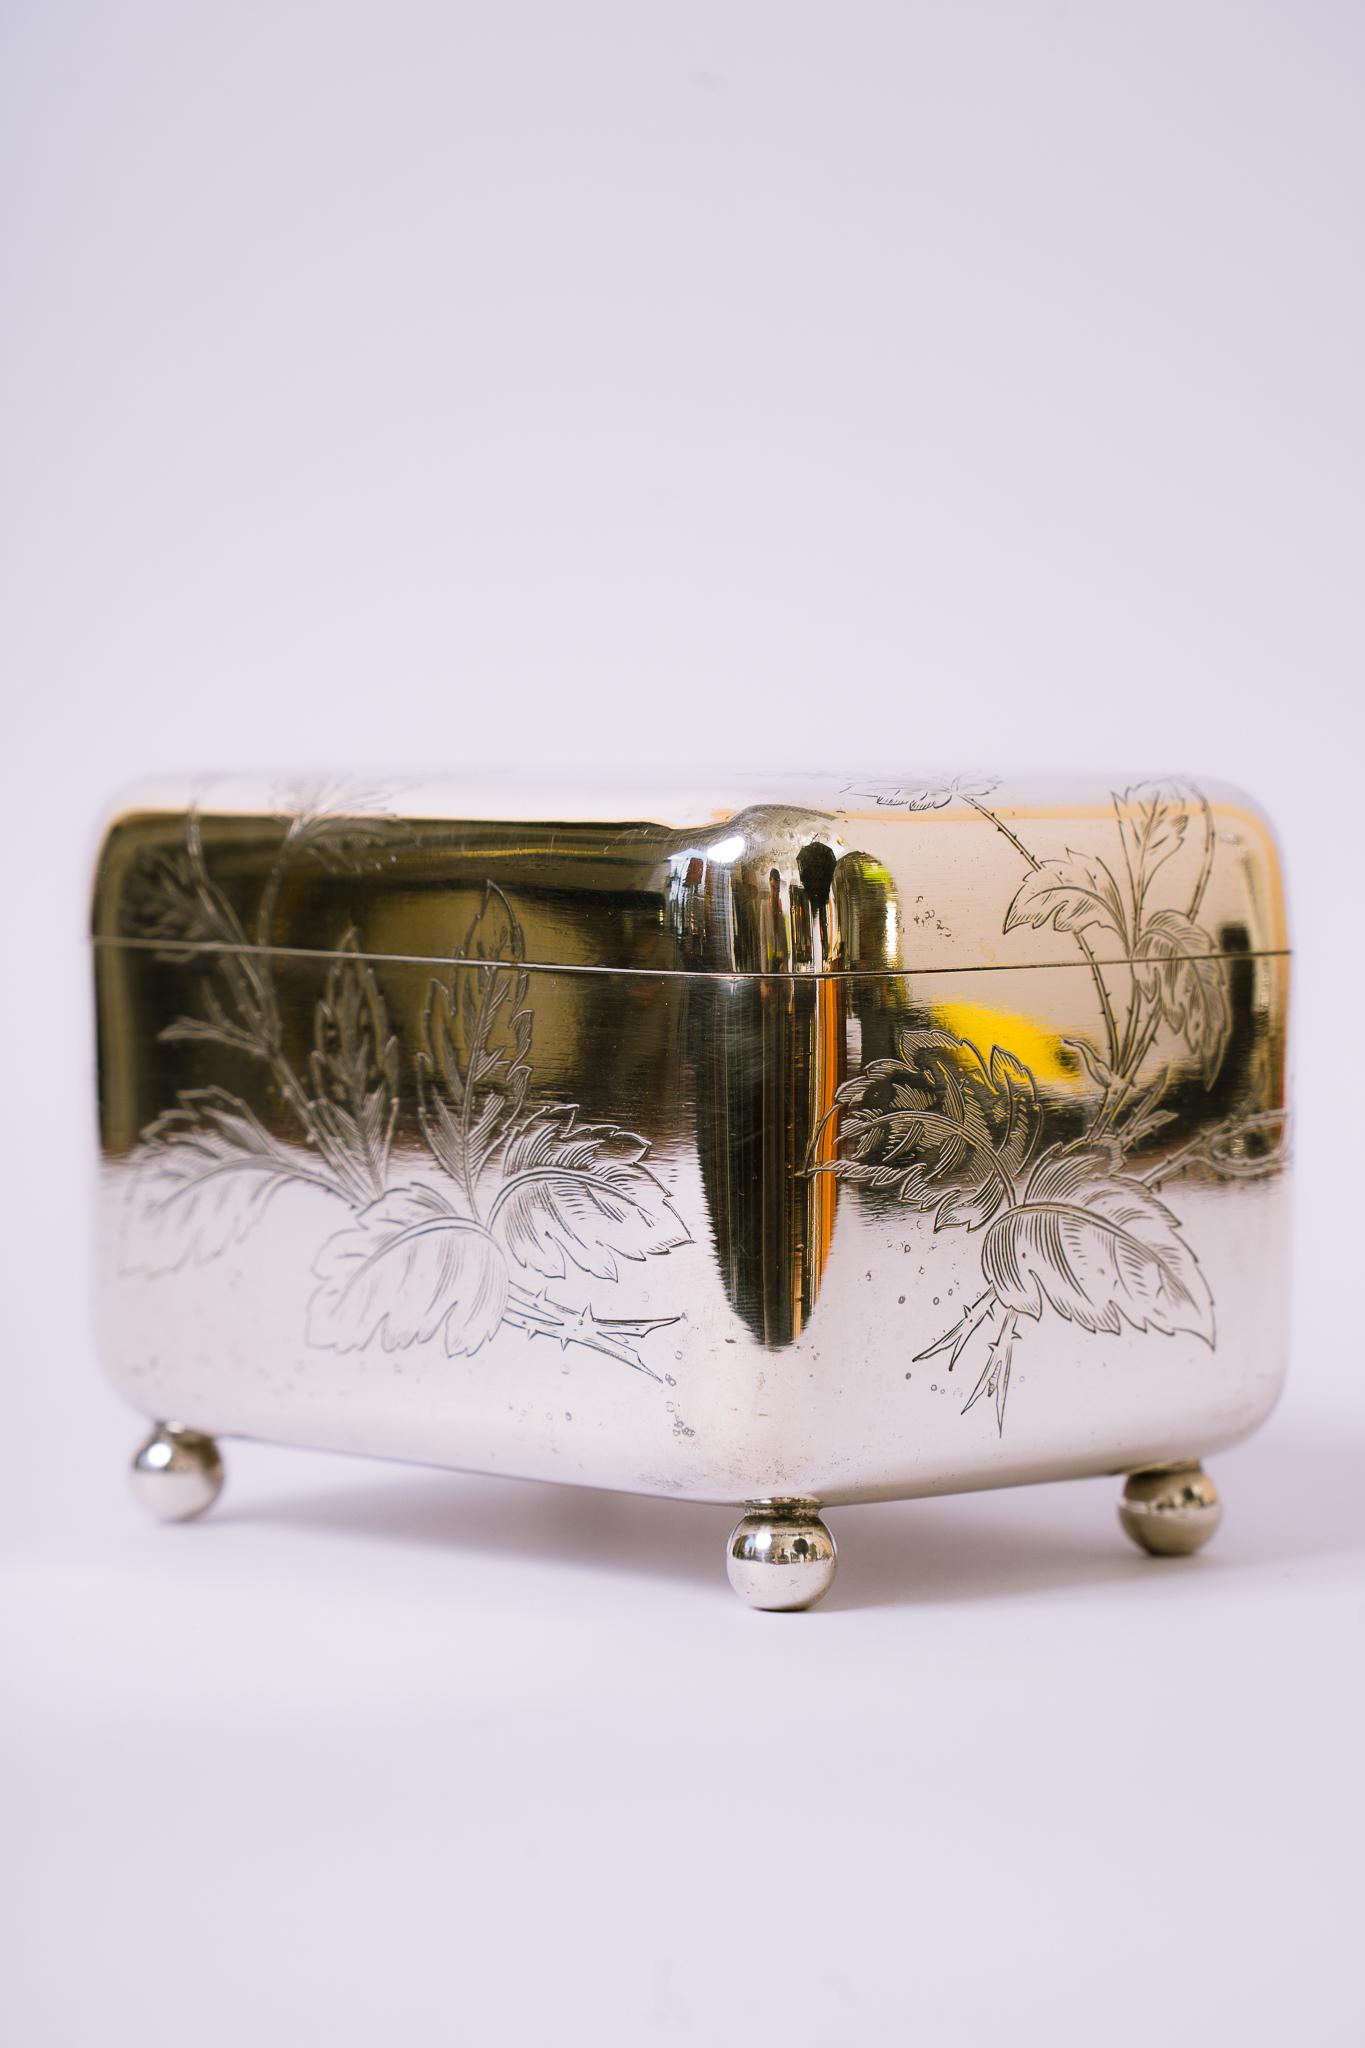 Silvered Art deco Jewelry Box, Vienna, around 1920s.
Polished and stove enameled.